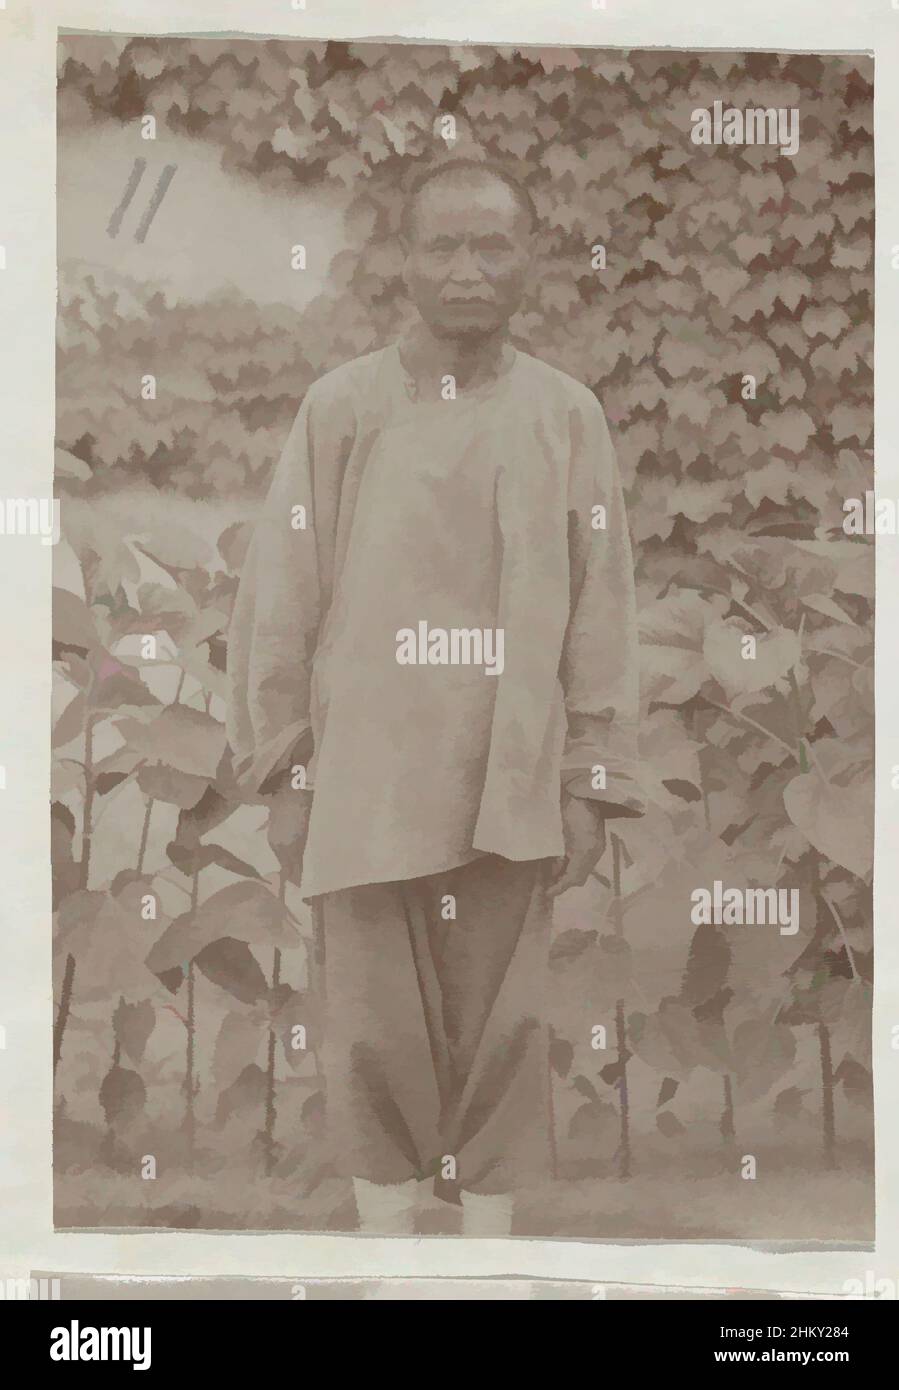 Art inspired by Portrait of a Chinese man in work clothes, unknown, c. 1879 - c. 1890, paper, albumen print, height 90 mm × width 60 mmheight 345 mm × width 265 mm, Classic works modernized by Artotop with a splash of modernity. Shapes, color and value, eye-catching visual impact on art. Emotions through freedom of artworks in a contemporary way. A timeless message pursuing a wildly creative new direction. Artists turning to the digital medium and creating the Artotop NFT Stock Photo